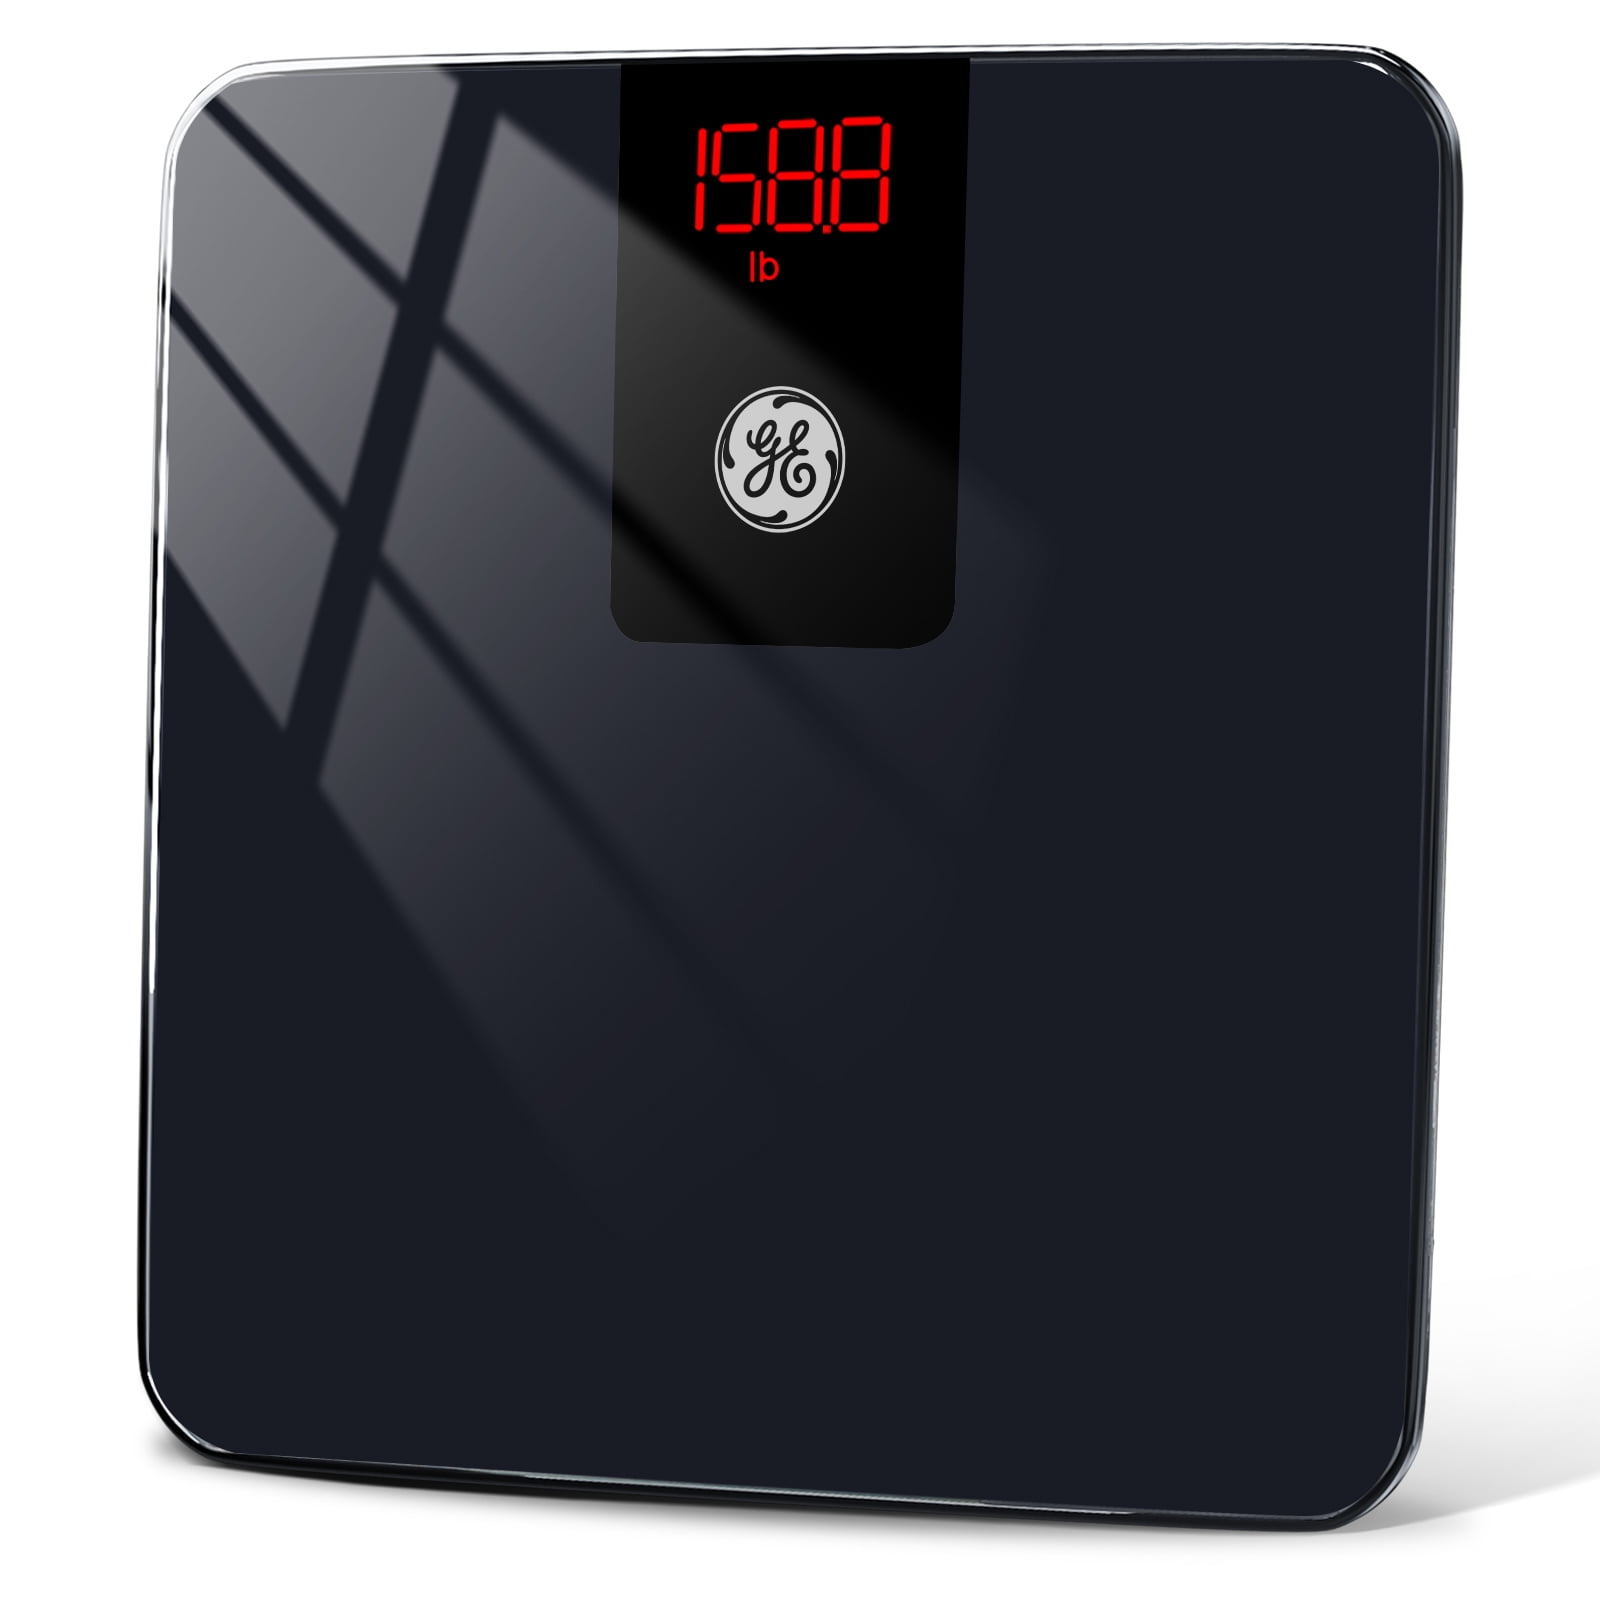  GE Digital Smart Bathroom Scale - Accurate Bluetooth Body Weight  and BMI - Electronic Black Scale, 400lb Capacity : Health & Household